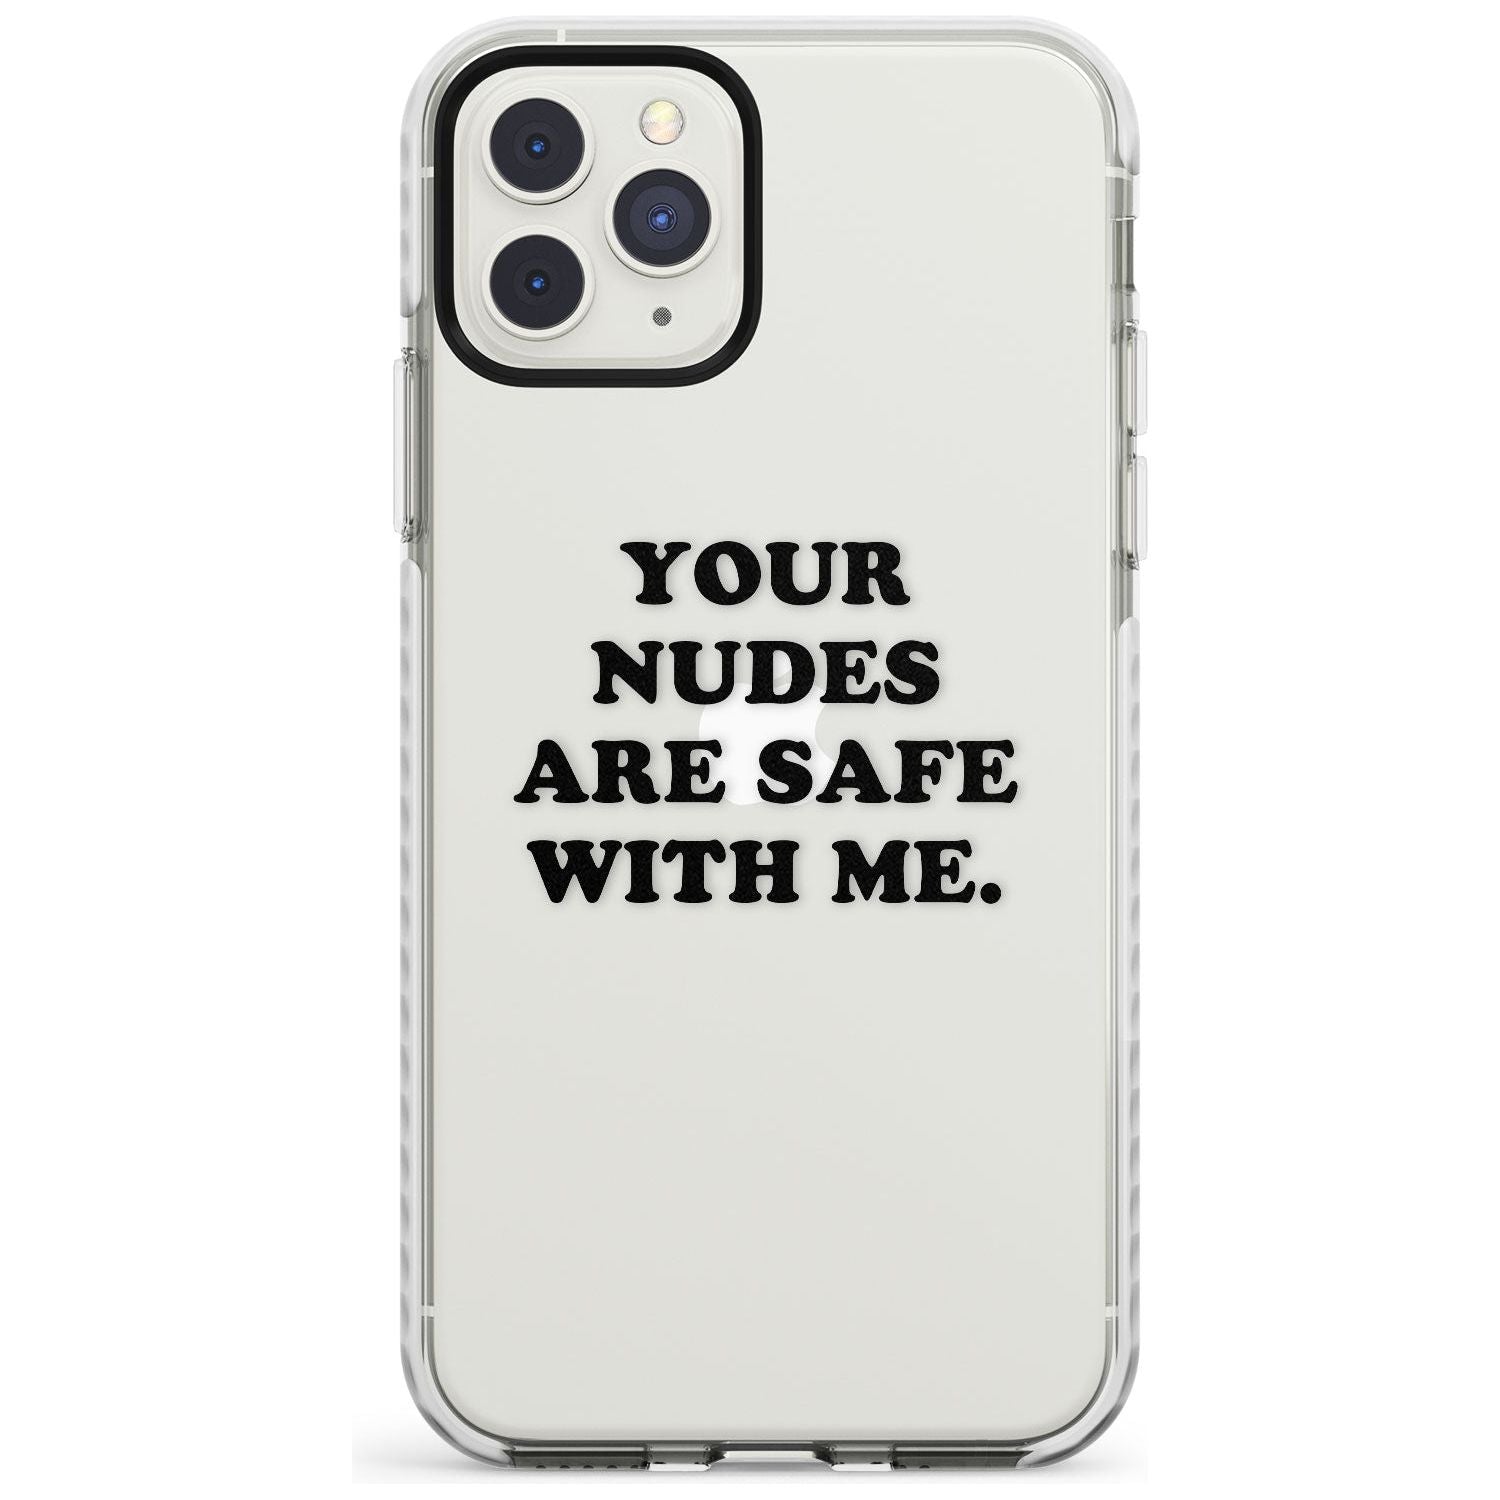 Your nudes are safe with me... BLACK Impact Phone Case for iPhone 11 Pro Max